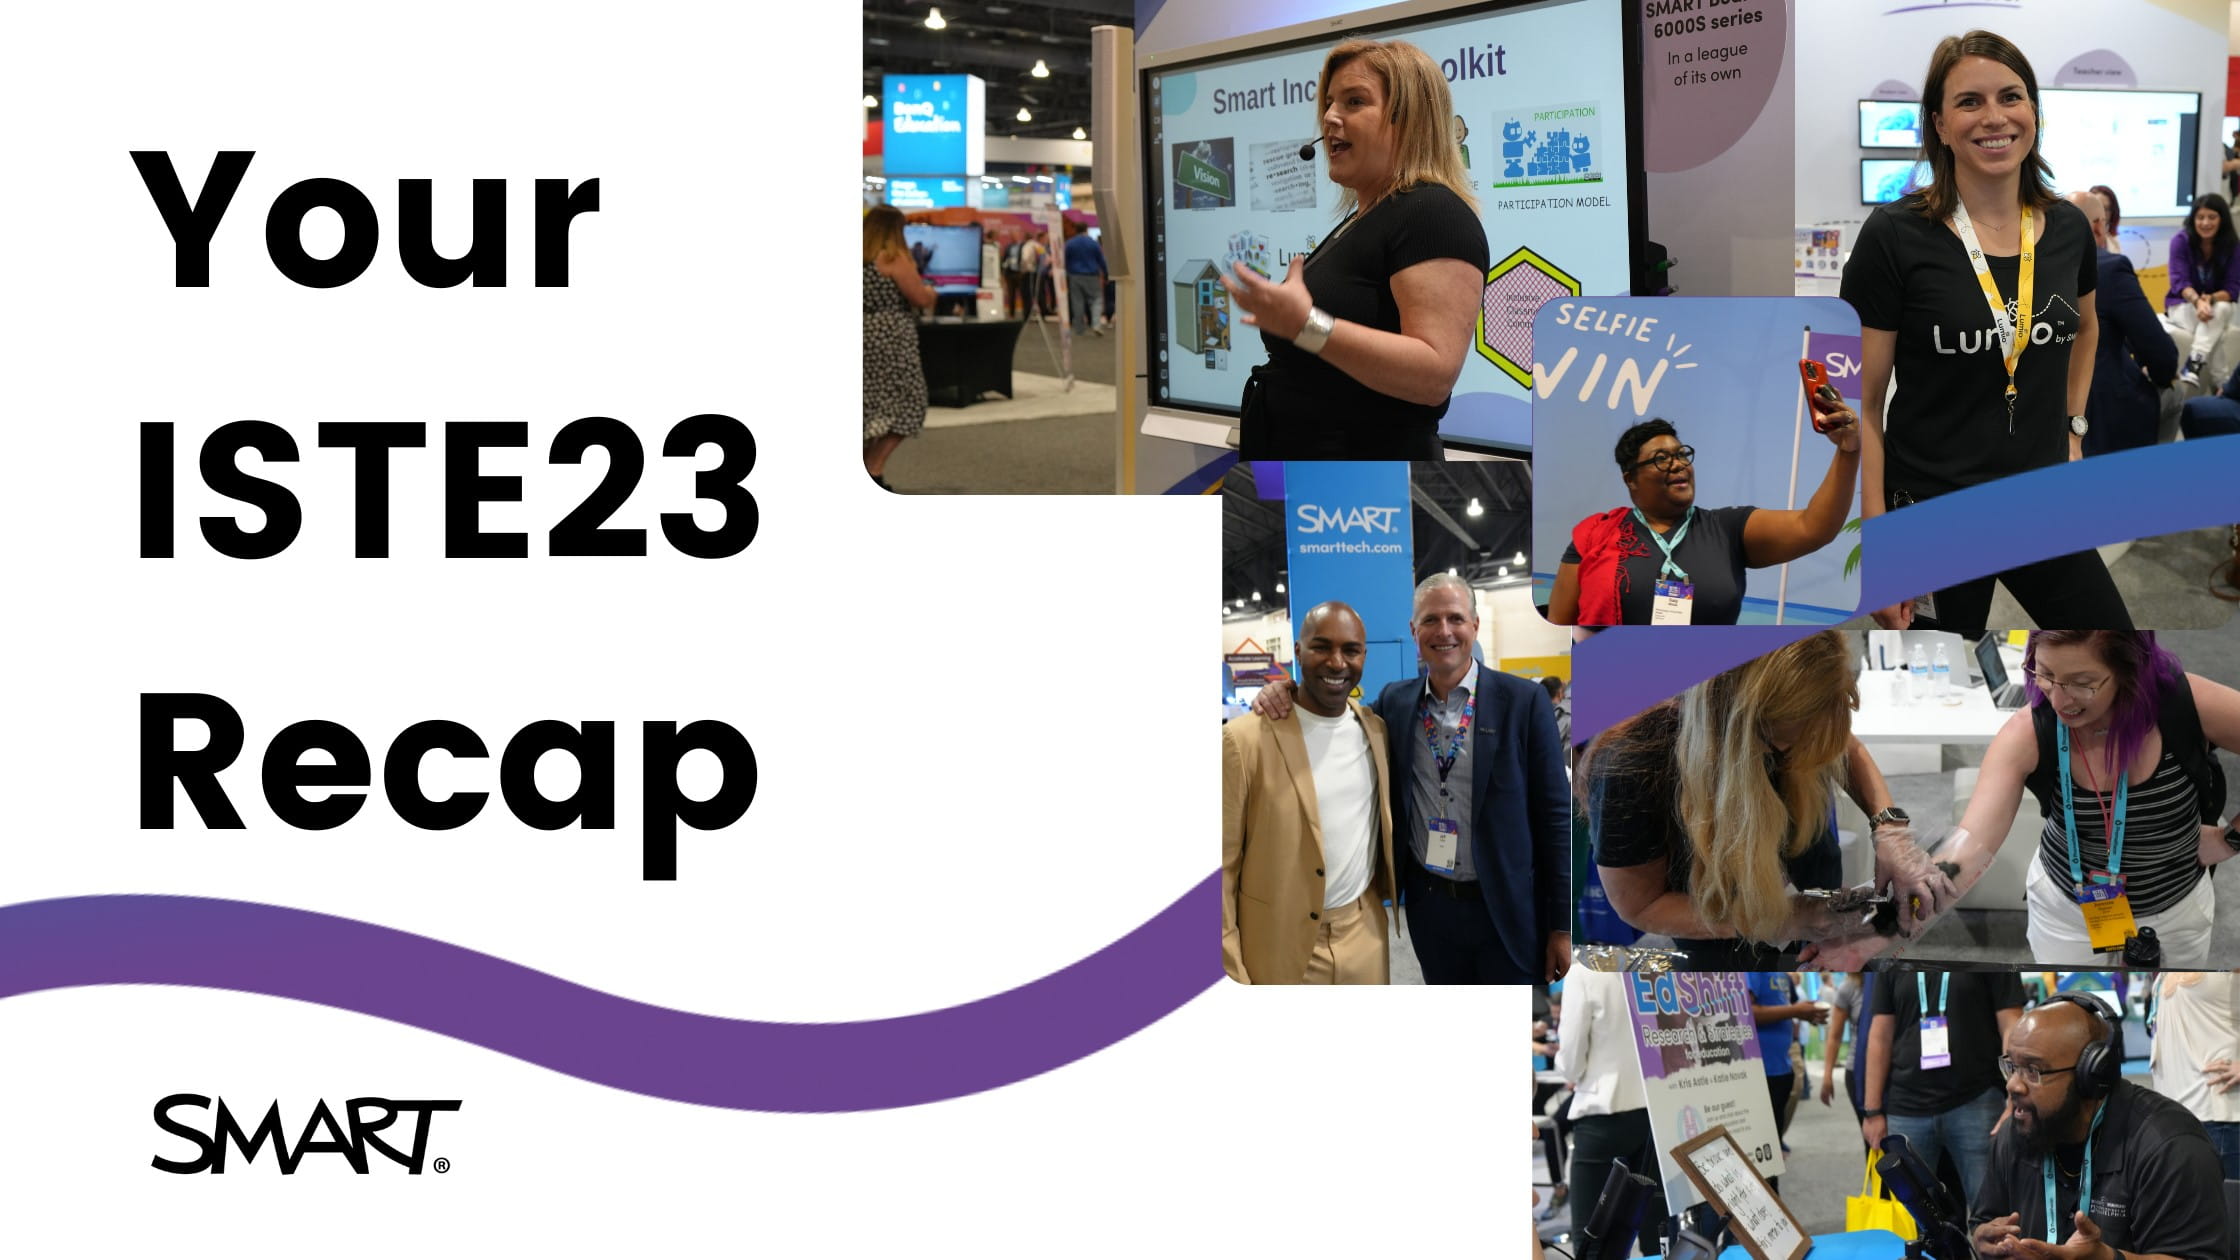 A collage of photos captured at the SMART booth at ISTE and copy: Your ISTE23 Recap.